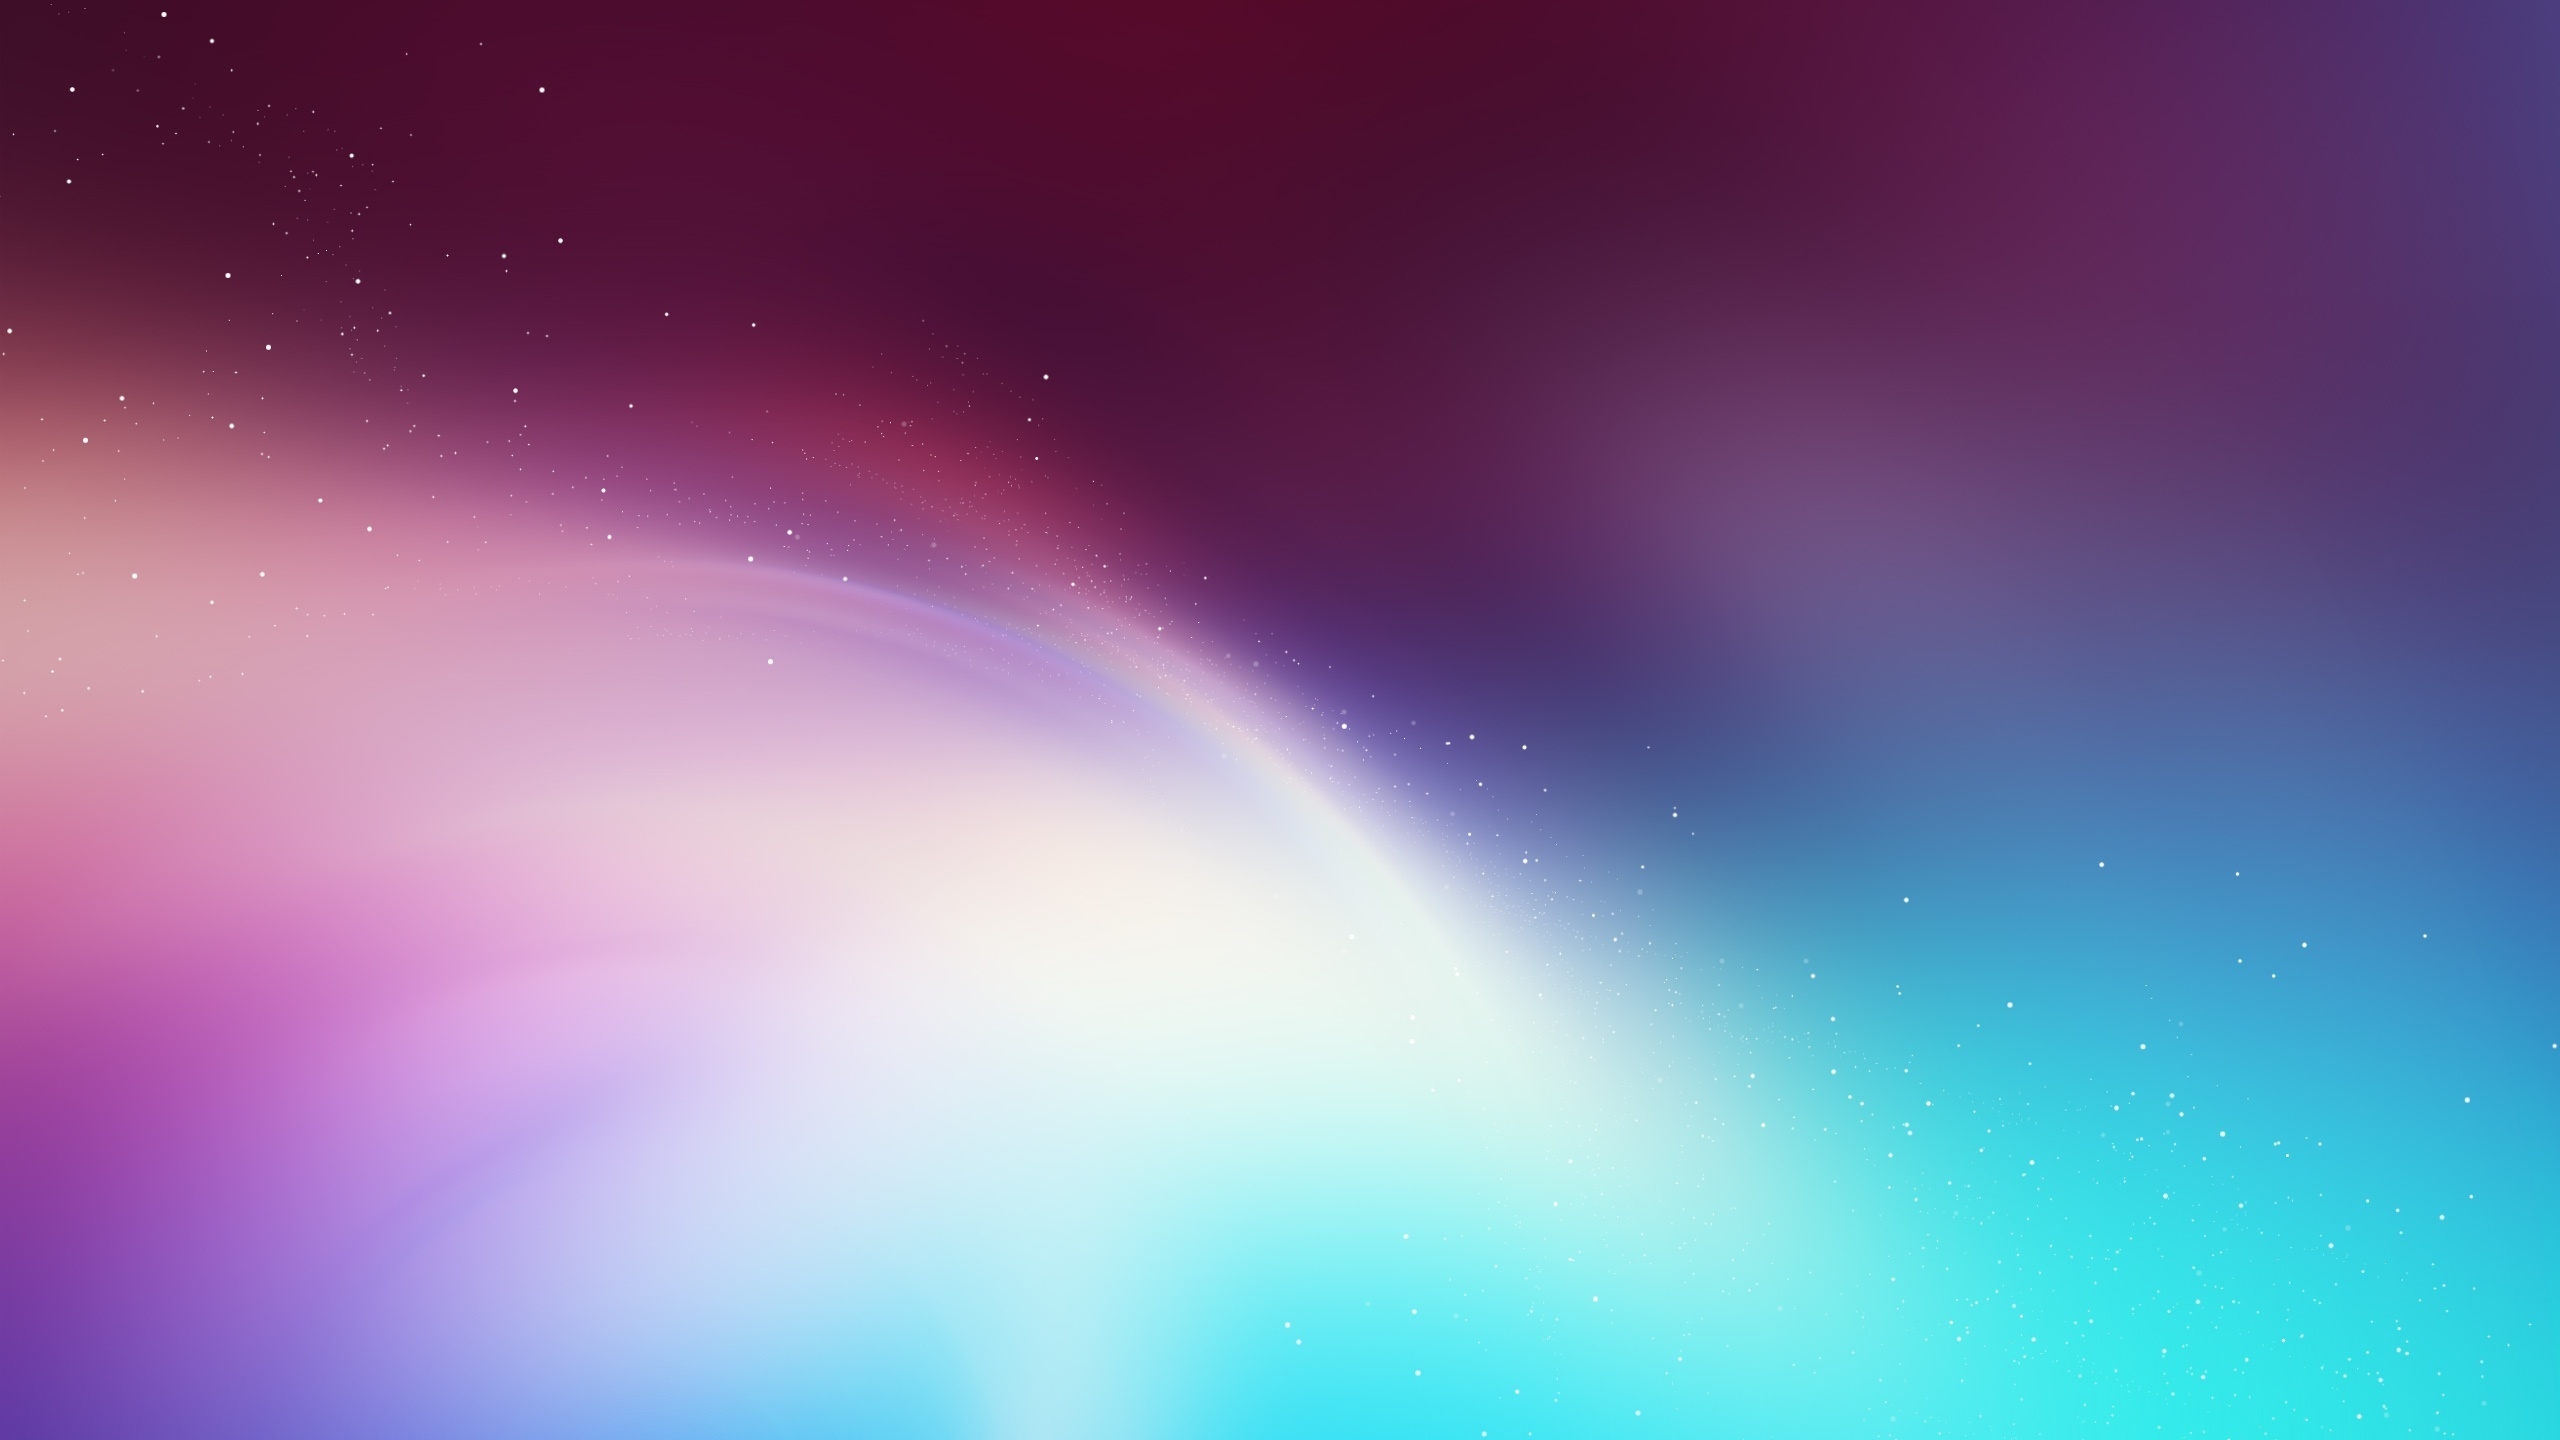 The Colors of Blur for 2560x1440 HDTV resolution